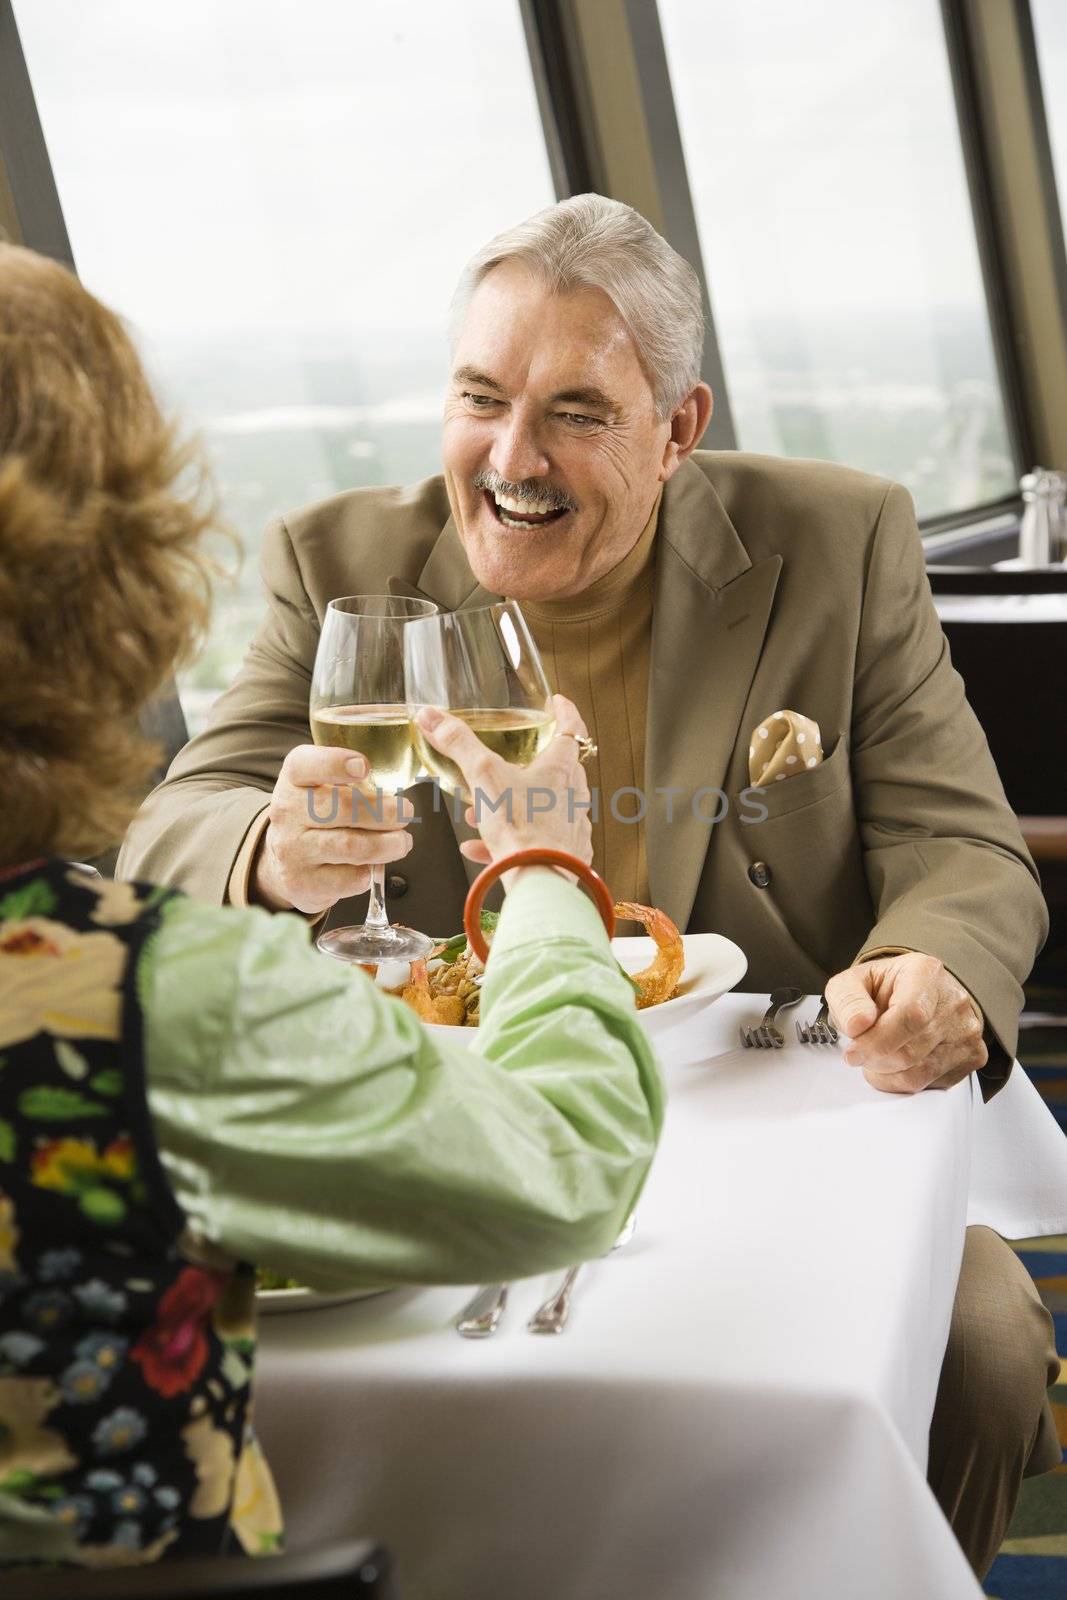 Mature couple dining and toasting in fancy restaurant by window with rooftop view of urban landscape.